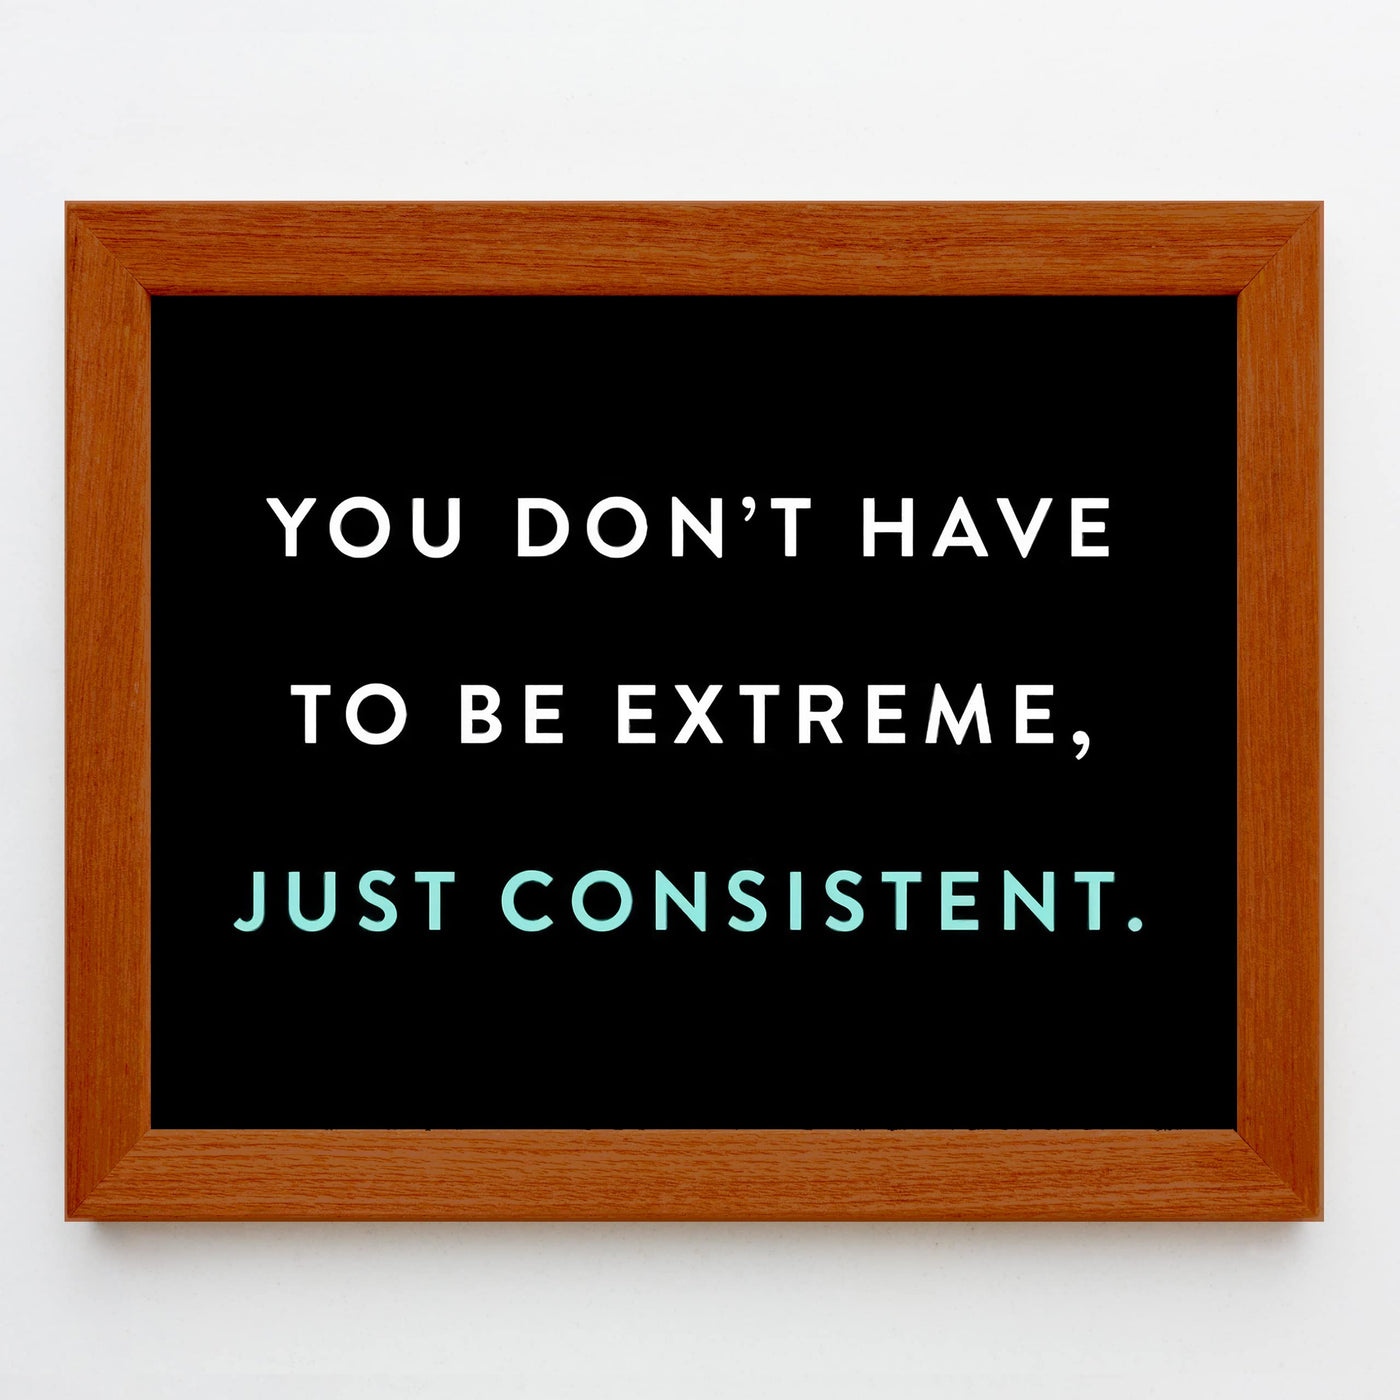 Don't Have to Be Extreme-Just Consistent Motivational Quotes Wall Art-10 x 8" Inspirational Typographic Exercise Print-Ready to Frame. Modern Home-Office-School-Gym Decor. Great Gift of Motivation!